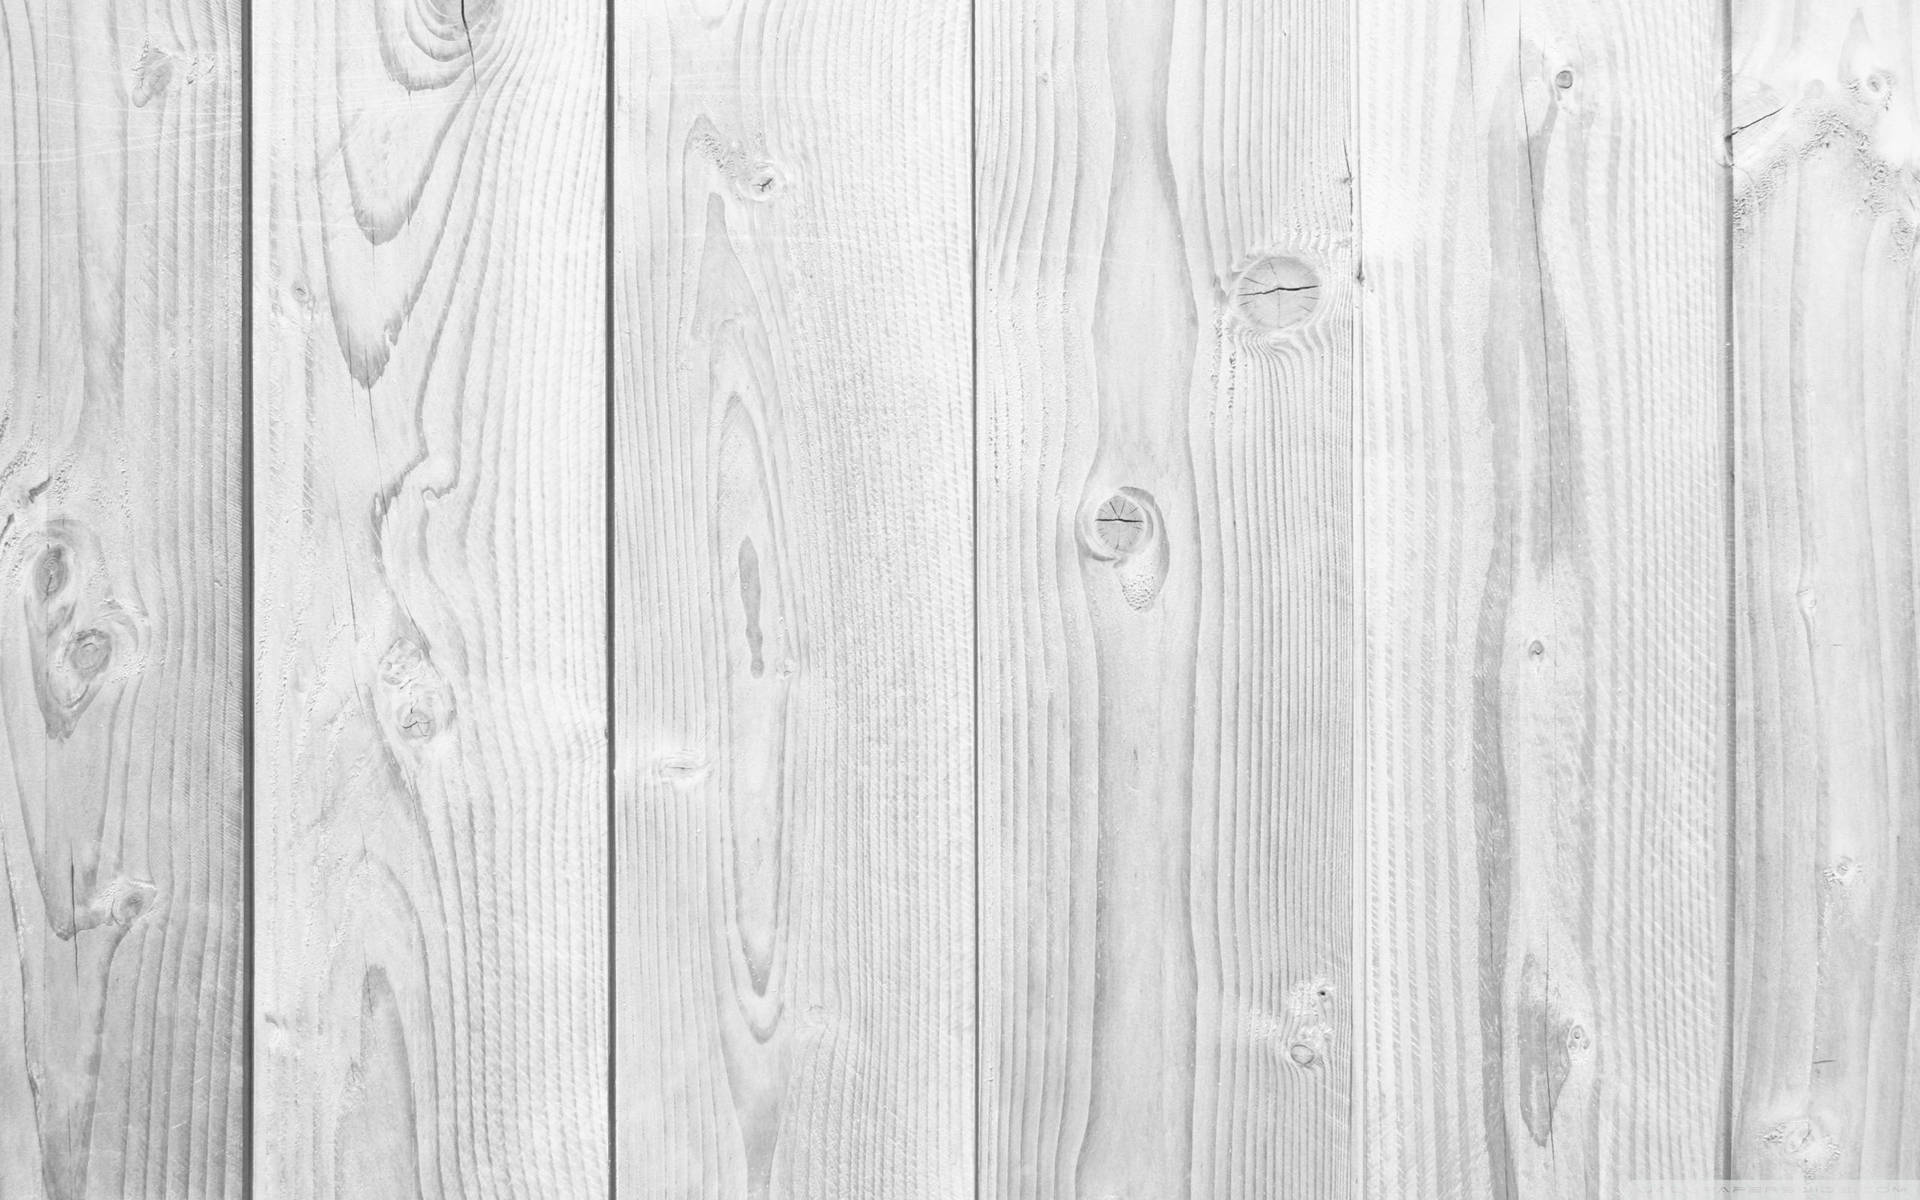 Minimalist wallpaper of wooden wall fence made using slats painted in white.